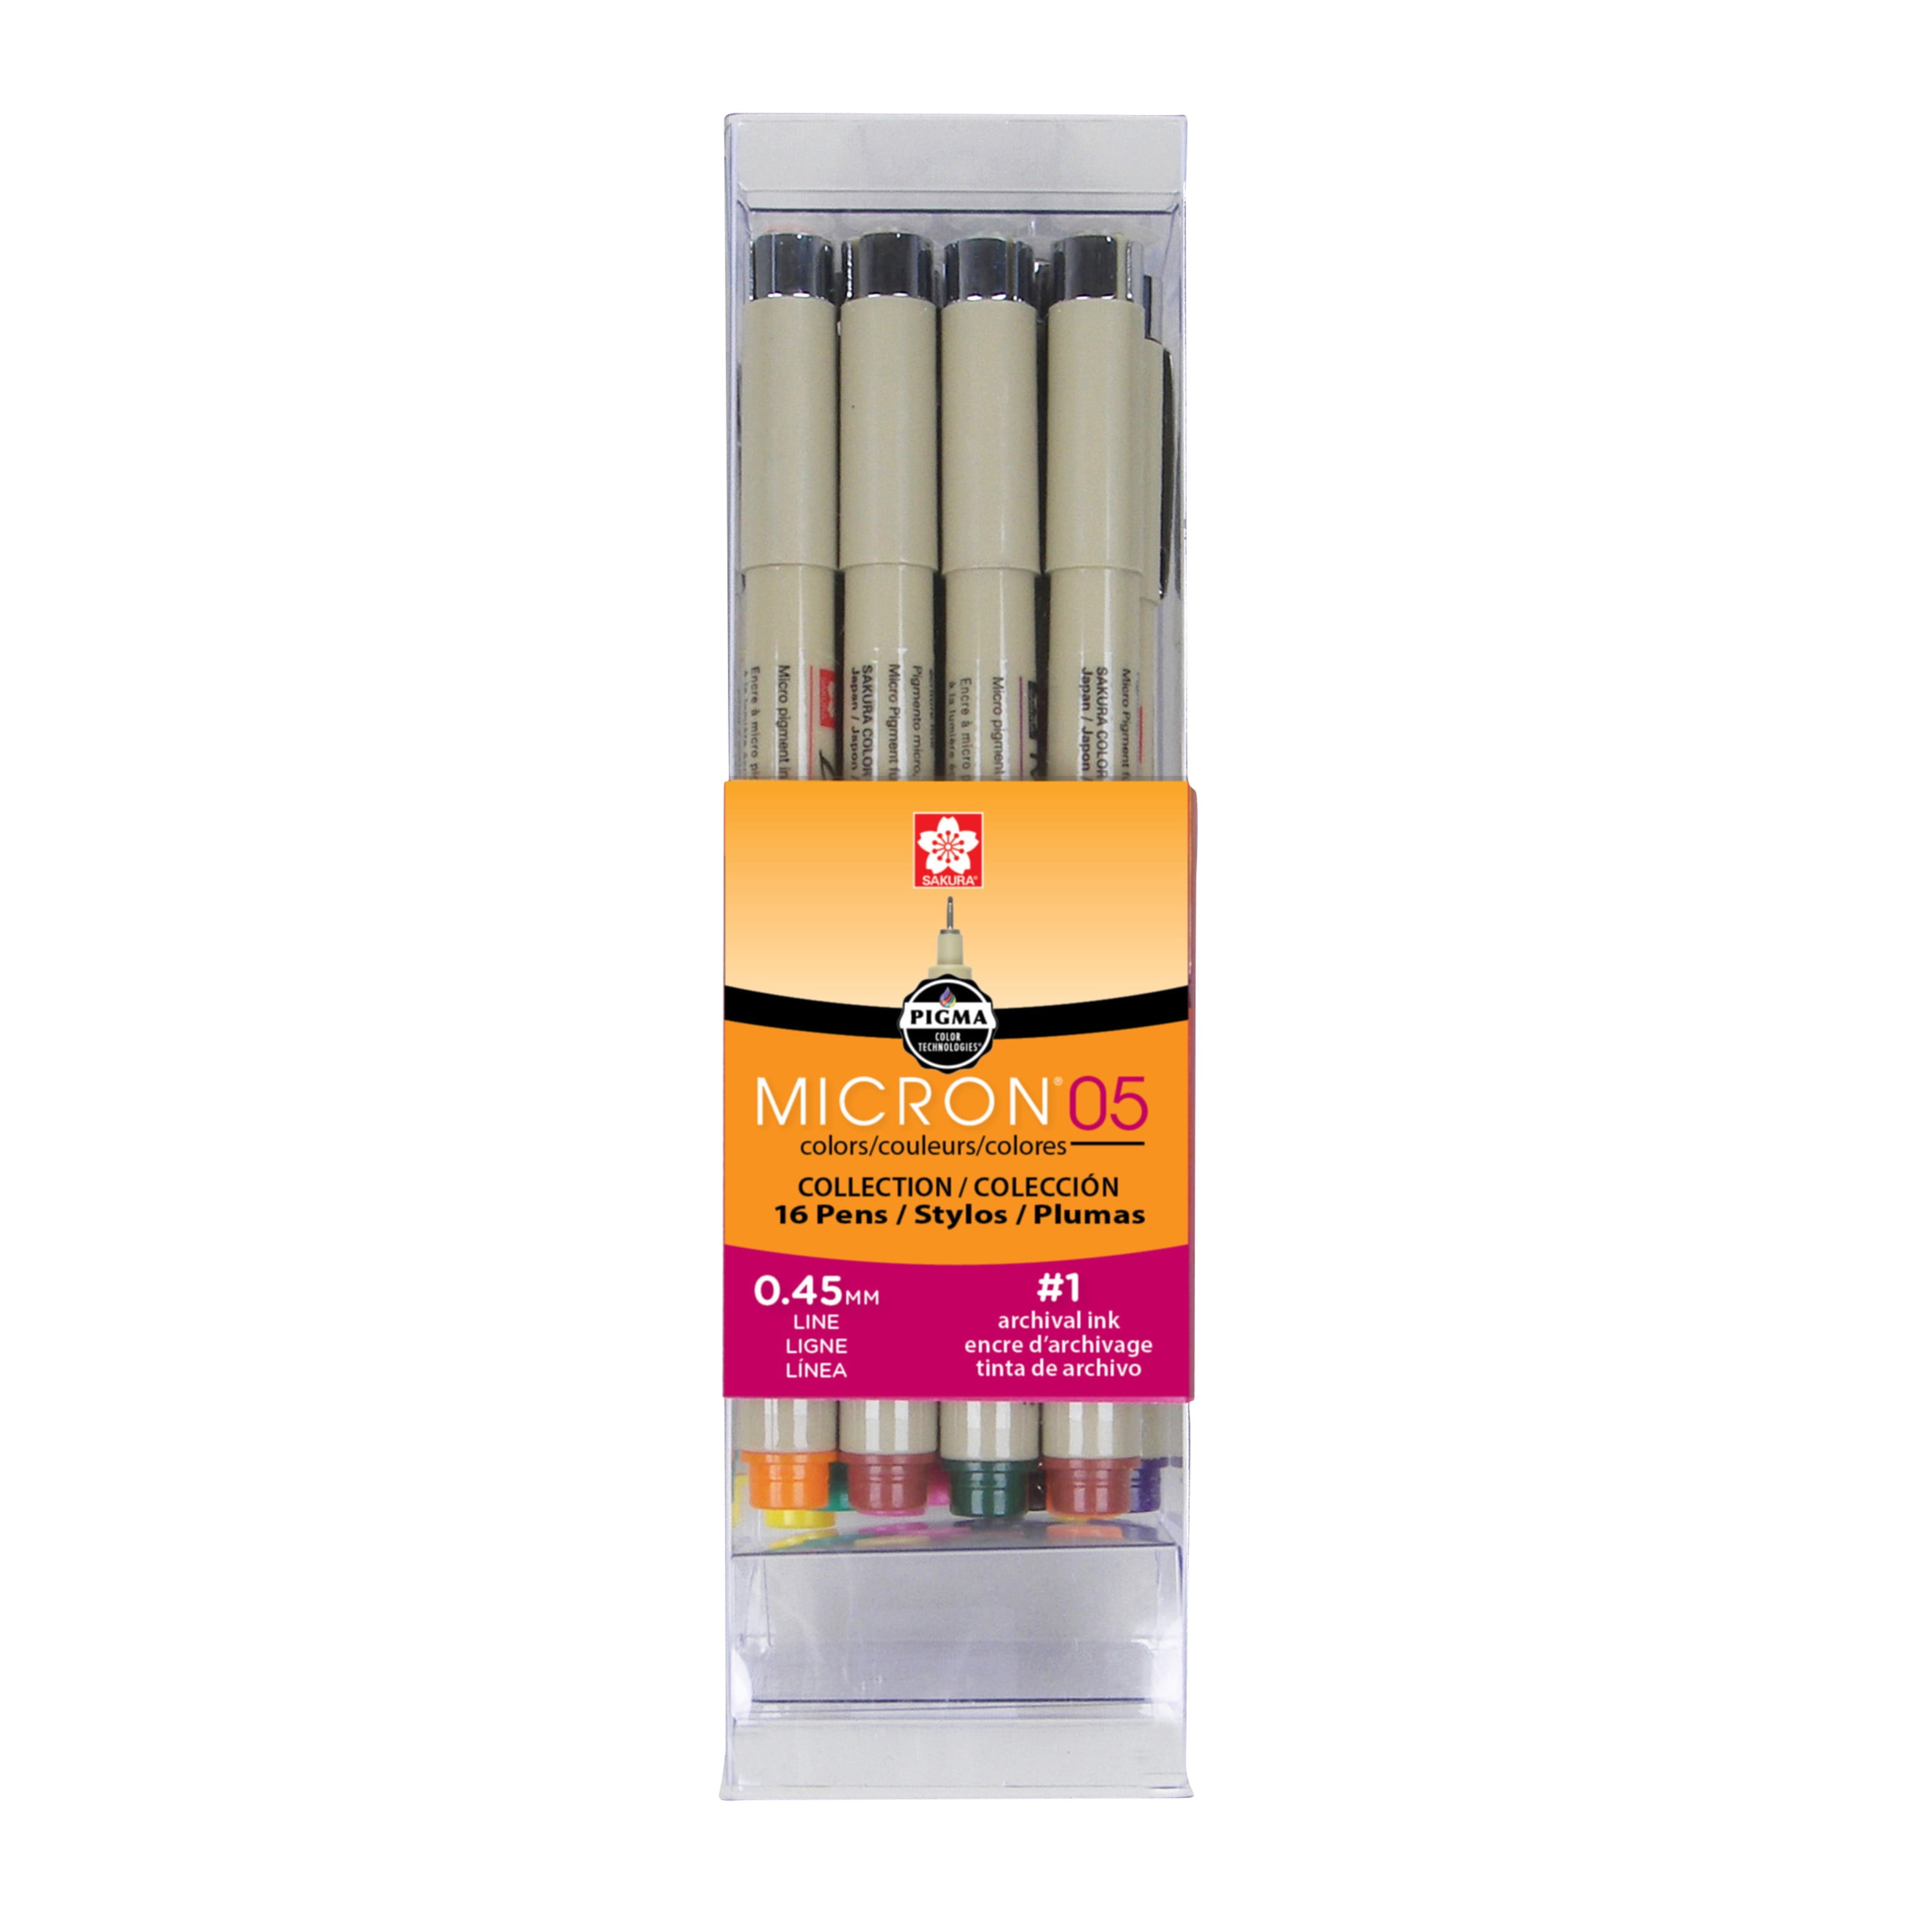 SAKURA Pigma Micron Fineliner Pens - Archival Black and Brown Ink Pens -  Pens for Writing Drawing or Journaling - Black and Brown Colored Ink - 003  and 005 Point Size - 4 Pack Fine Tip